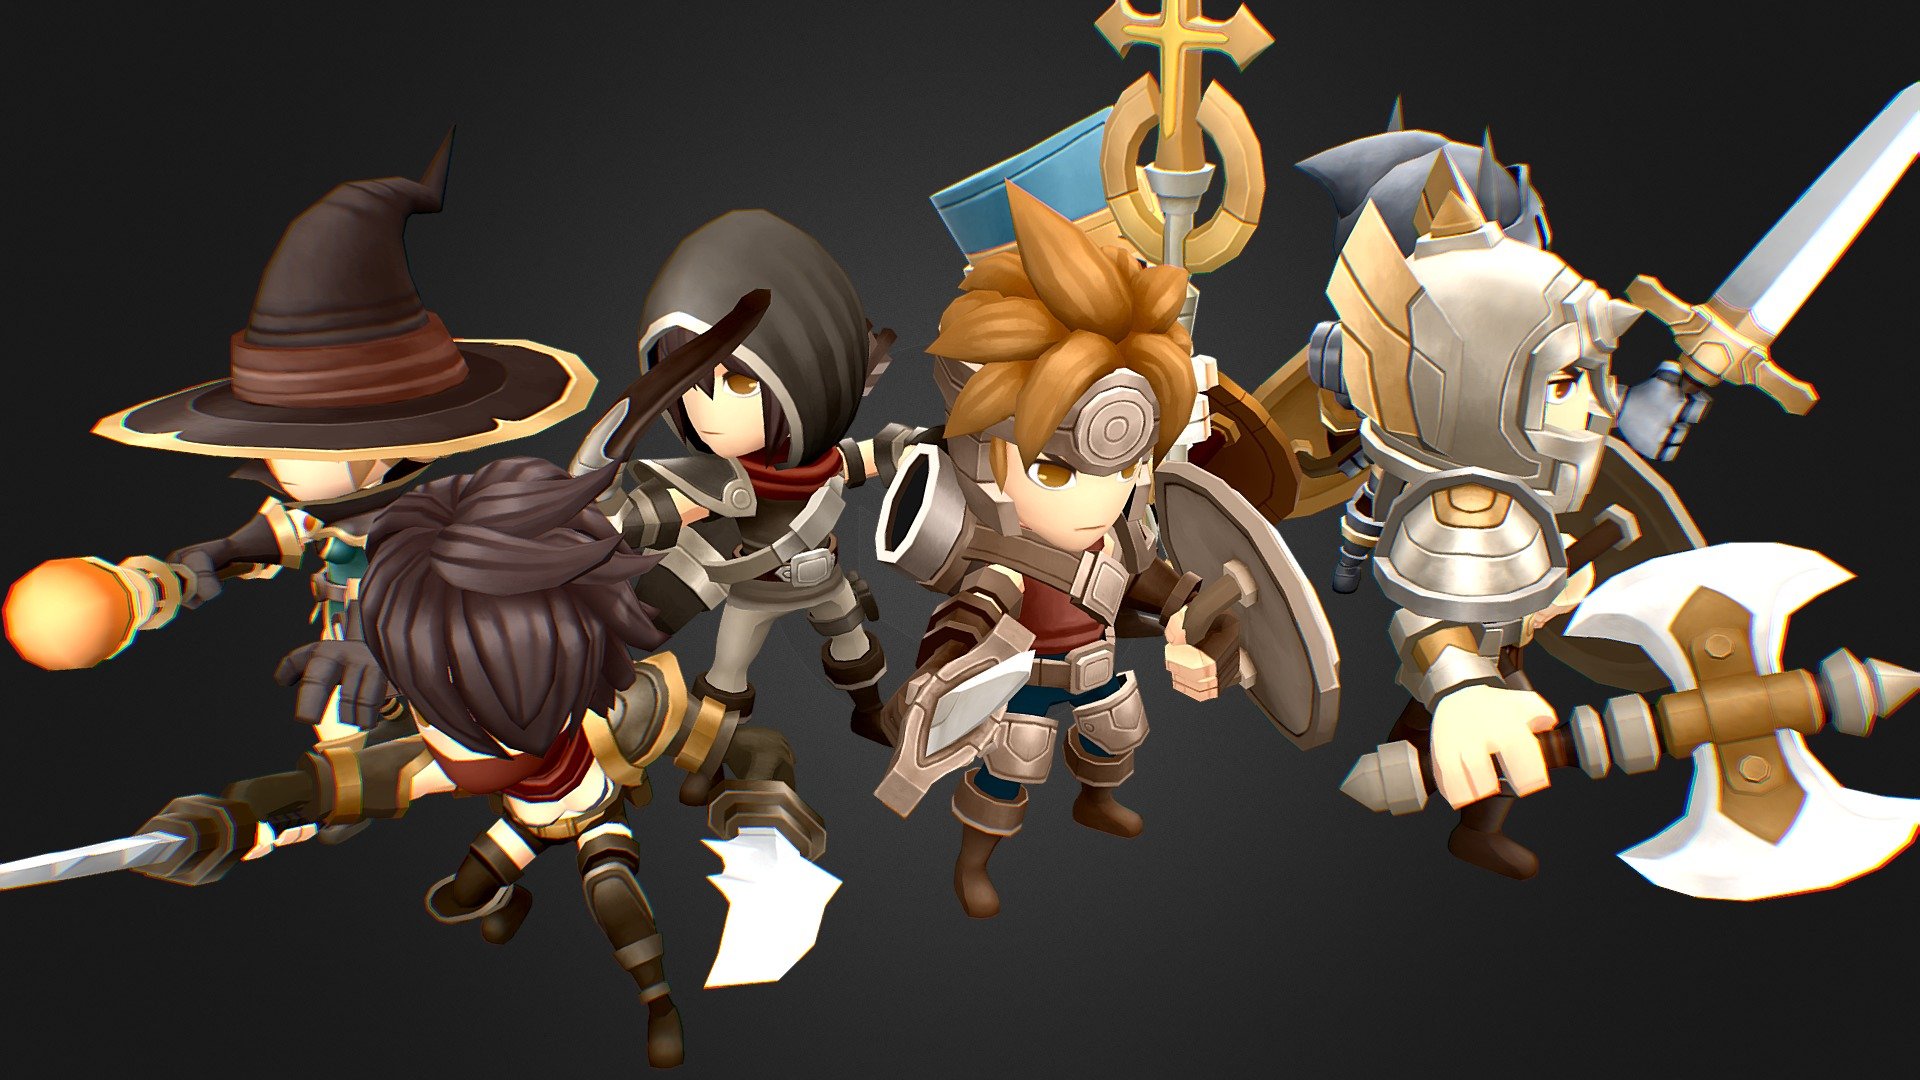 Supported Unity versions 2018.4.8 or higher

Swordsman / Warrior / Mage / Archer / Knight / Assassin / Priest

Each character own 3 colors textures ( 2048x2048 PNG )

Animation preview

Each character own 11 basic animations

Idle / Walk / Run / Attack x2 / Damage x2 / Jump / Stunned / Die / GetUp - Hero Series - Adventurers - 3D model by Downrain DC (@downraindc3d) 3d model